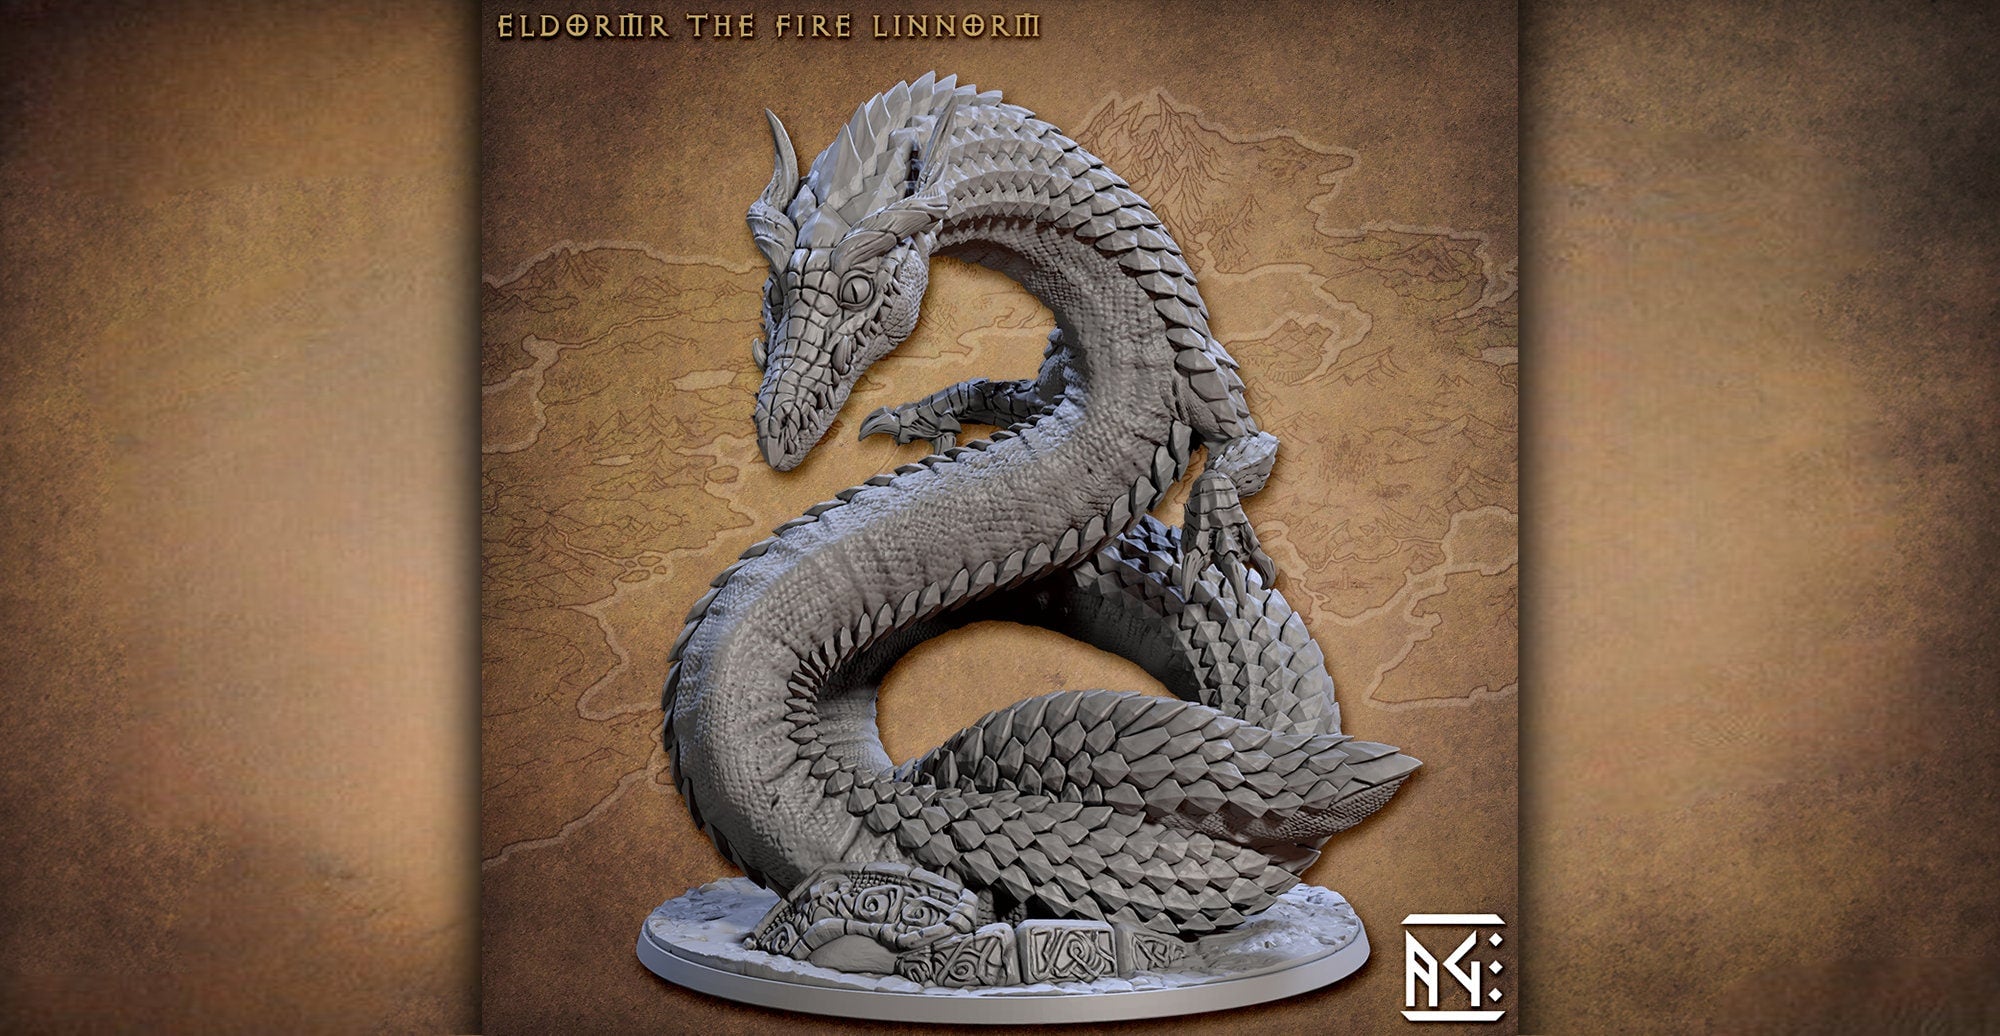 Lindworm "Eldormr" | 12K 3D Print | Dungeons and Dragons | DnD | Pathfinder | Tabletop | RPG | Hero Size | 28-32 mm-Role Playing Miniatures